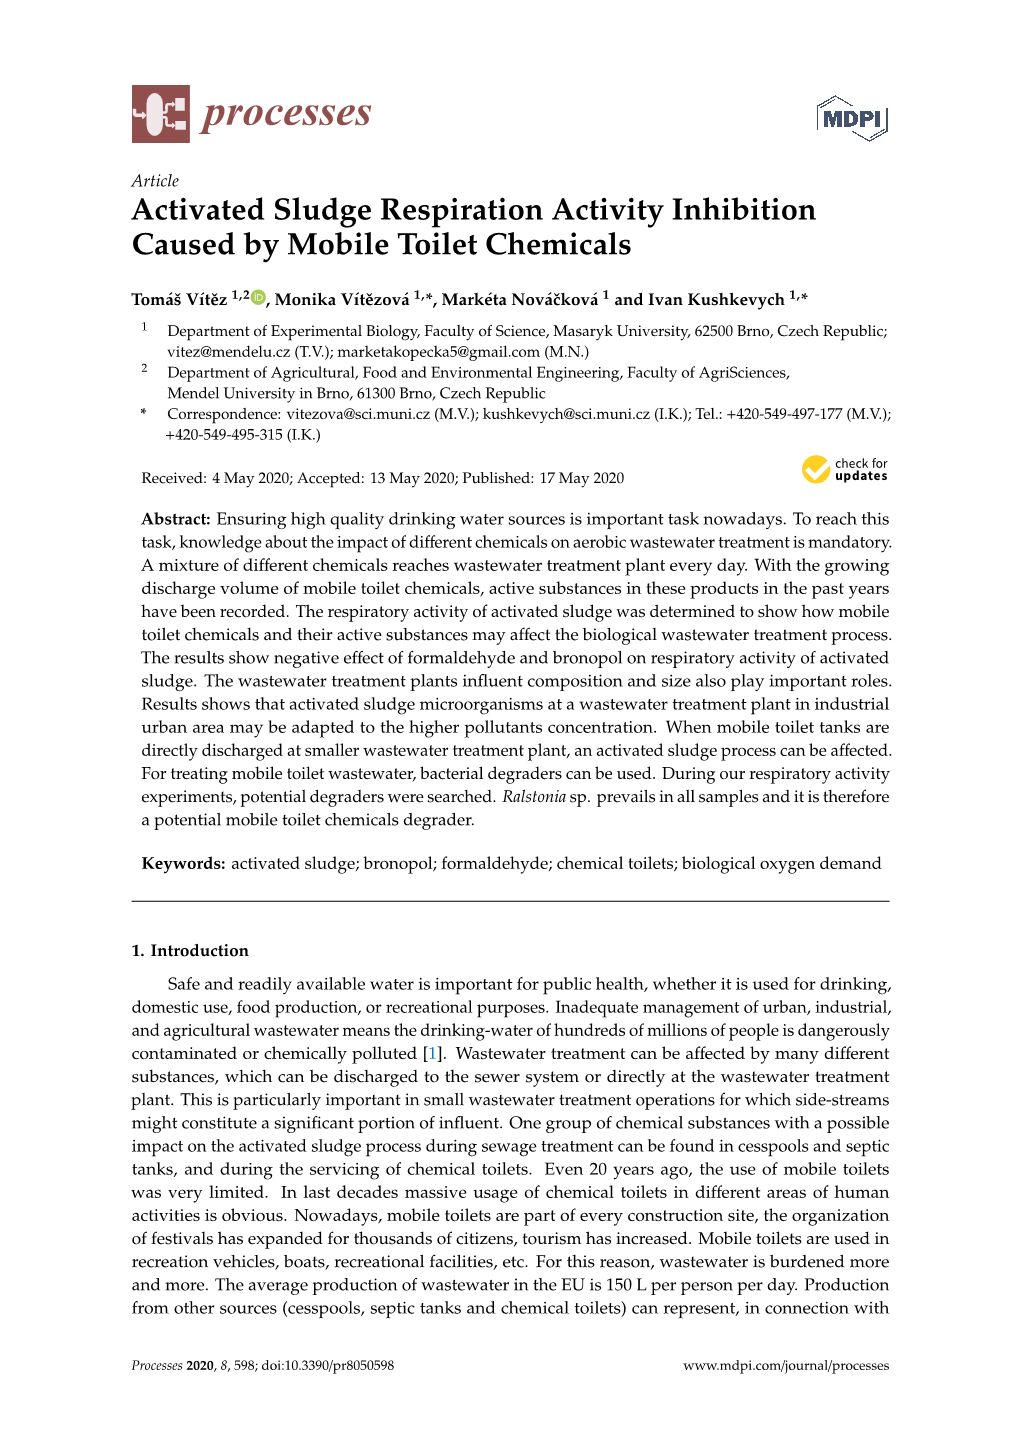 Activated Sludge Respiration Activity Inhibition Caused by Mobile Toilet Chemicals